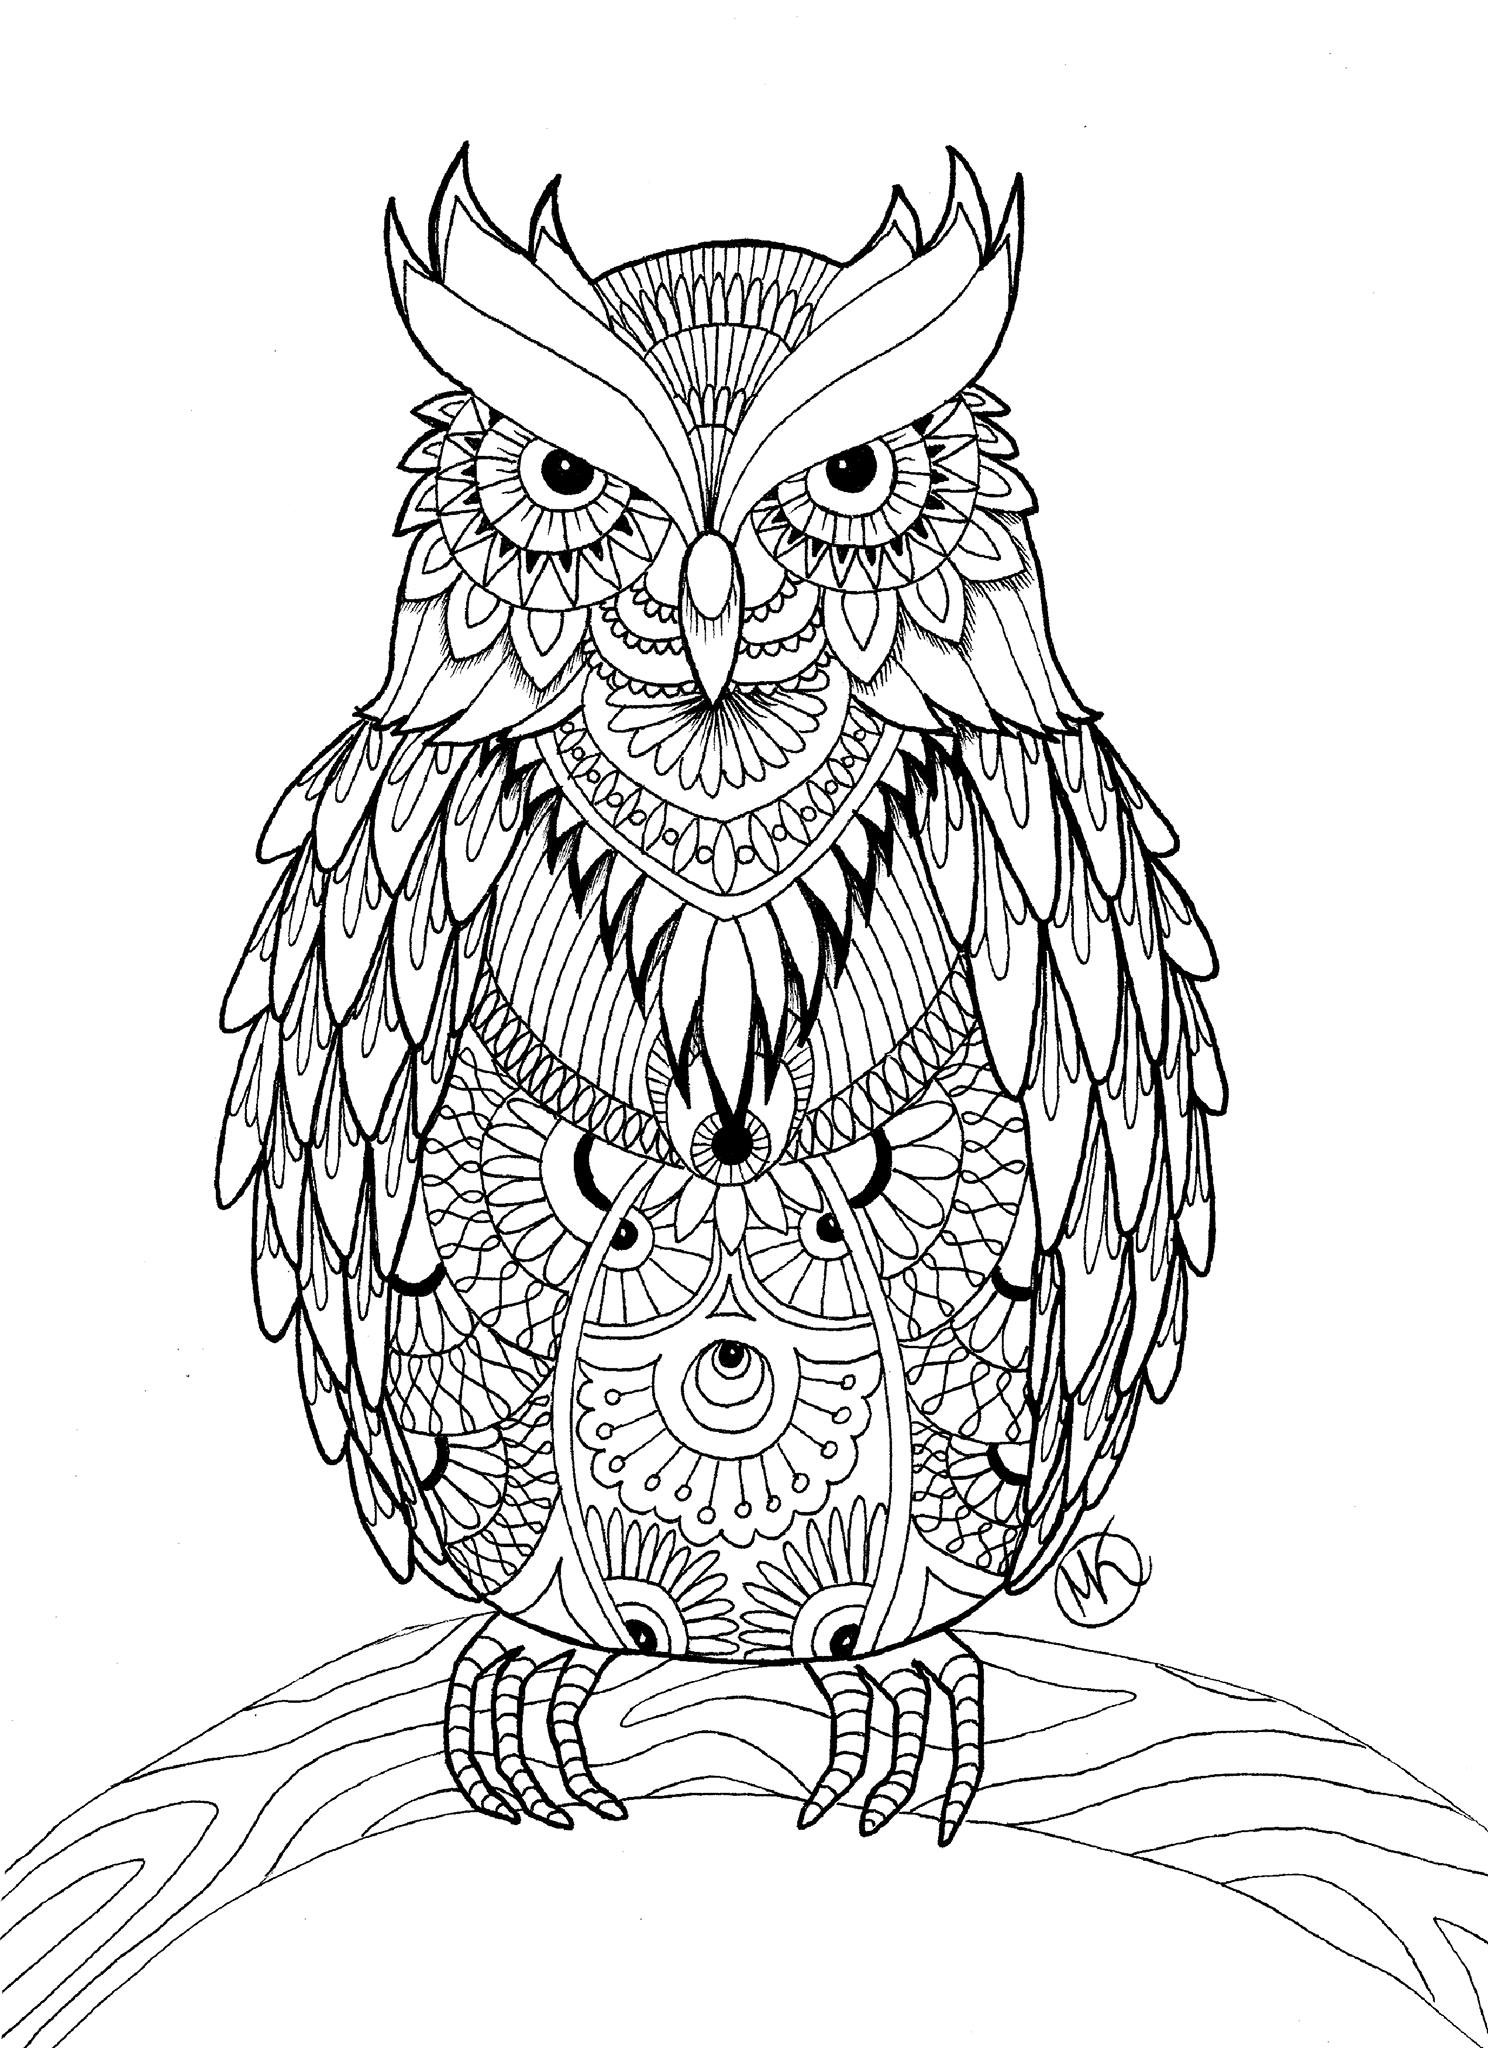 Detailed Coloring Books For Adults
 OWL Coloring Pages for Adults Free Detailed Owl Coloring